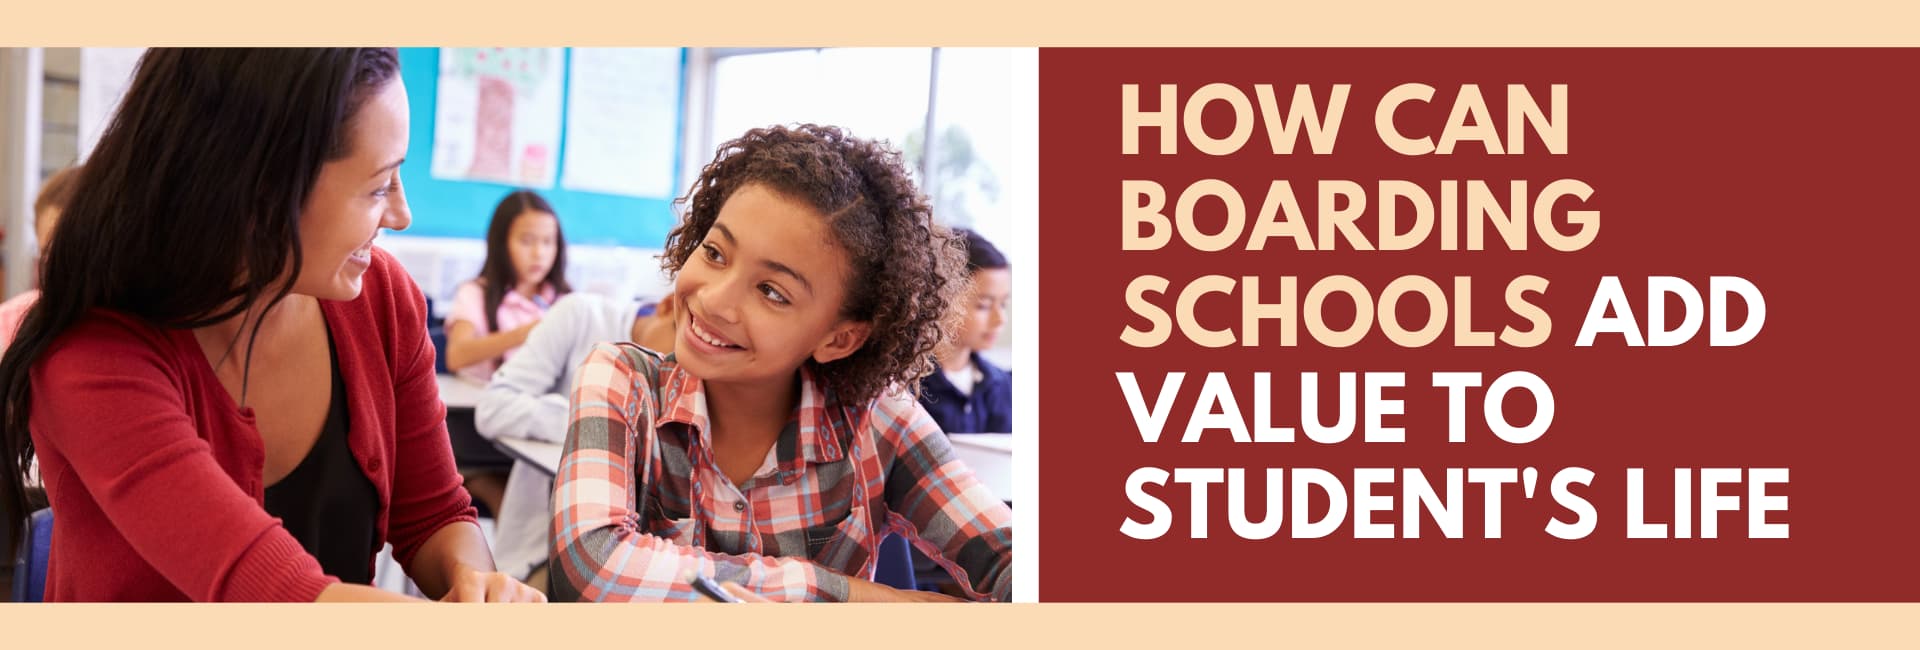 How Can Boarding Schools Add Value To Student's Life